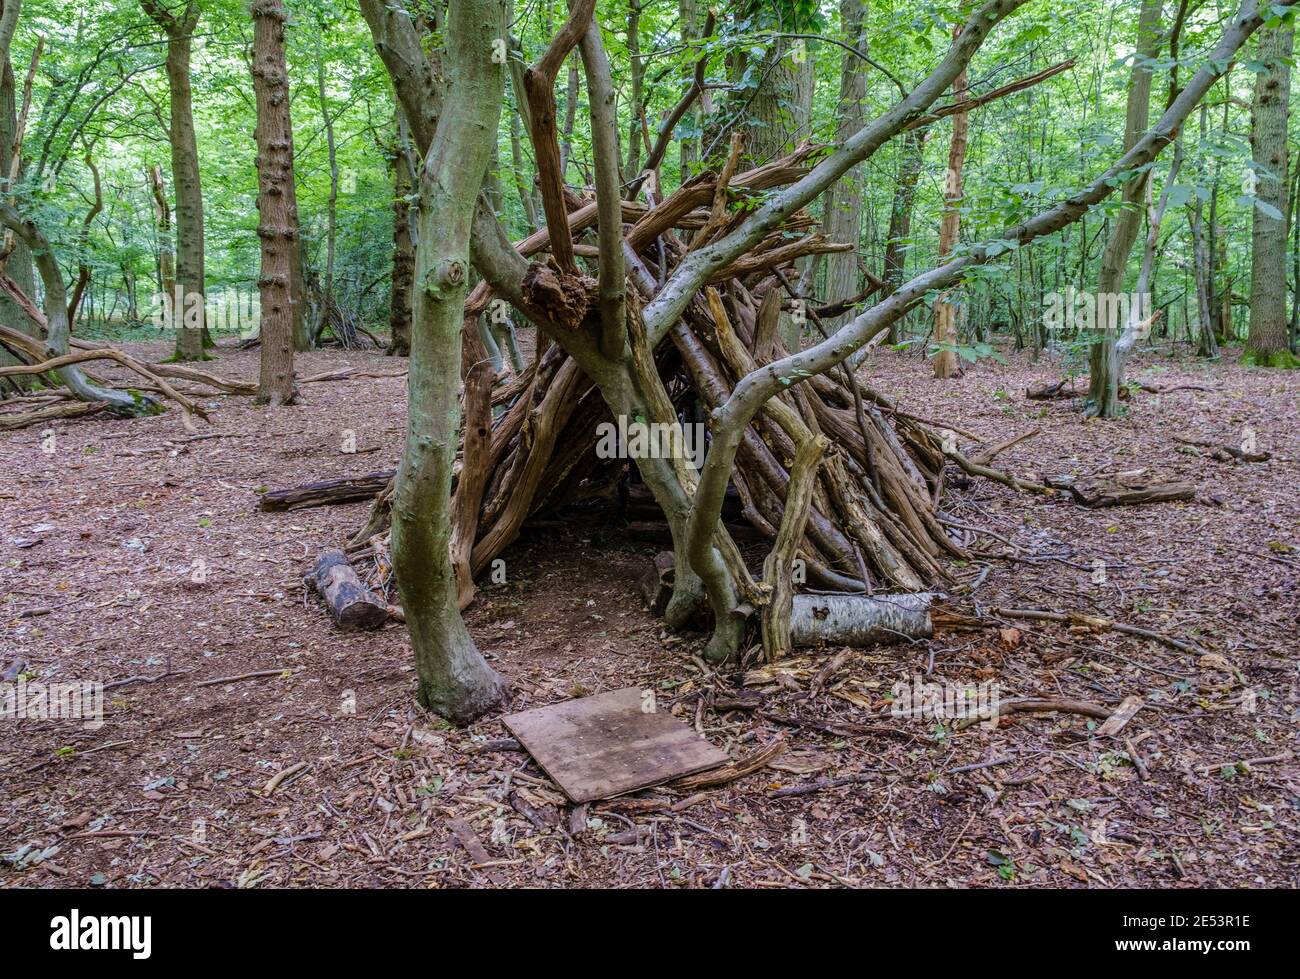 A stick den in Ruislip Woods, Nature reserve in England & Site of Special Scientific Interest. London Borough of Hillingdon. Stock Photo